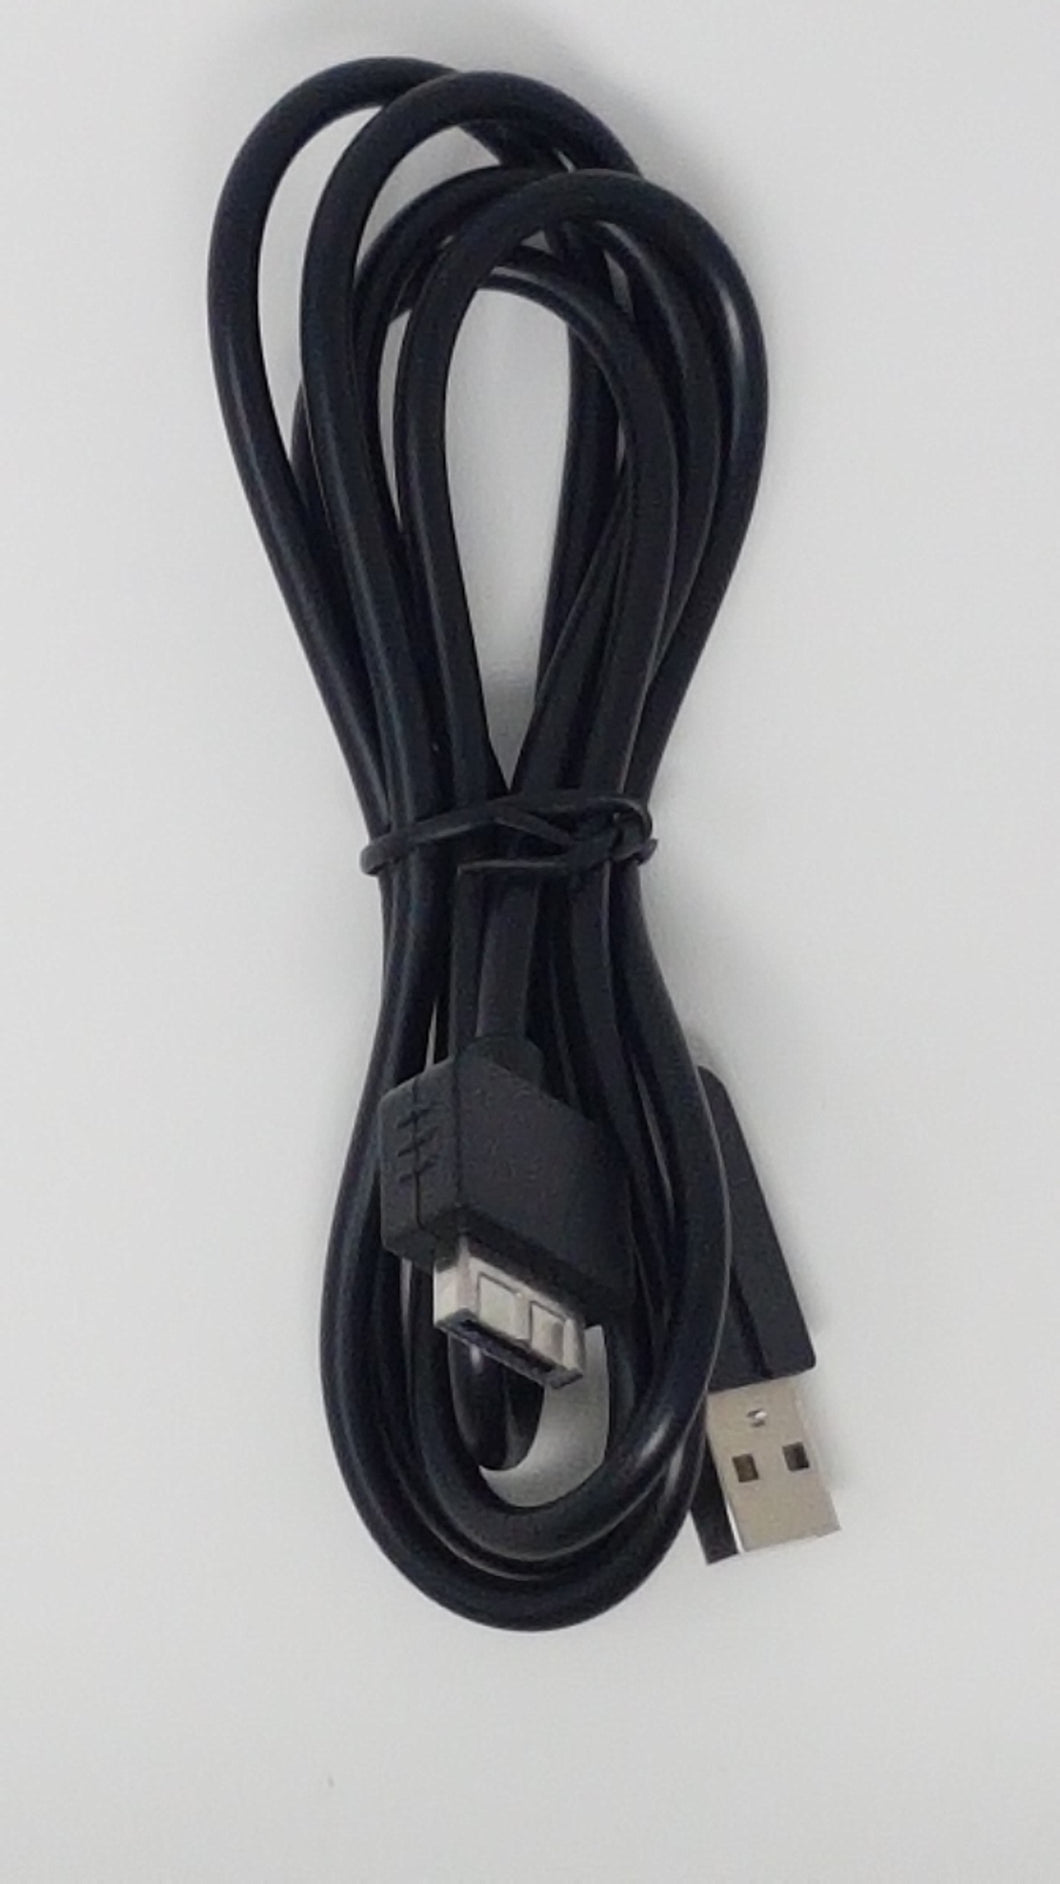 SONY PS VITA 1000 DATA AND CHARGING CABLE USB